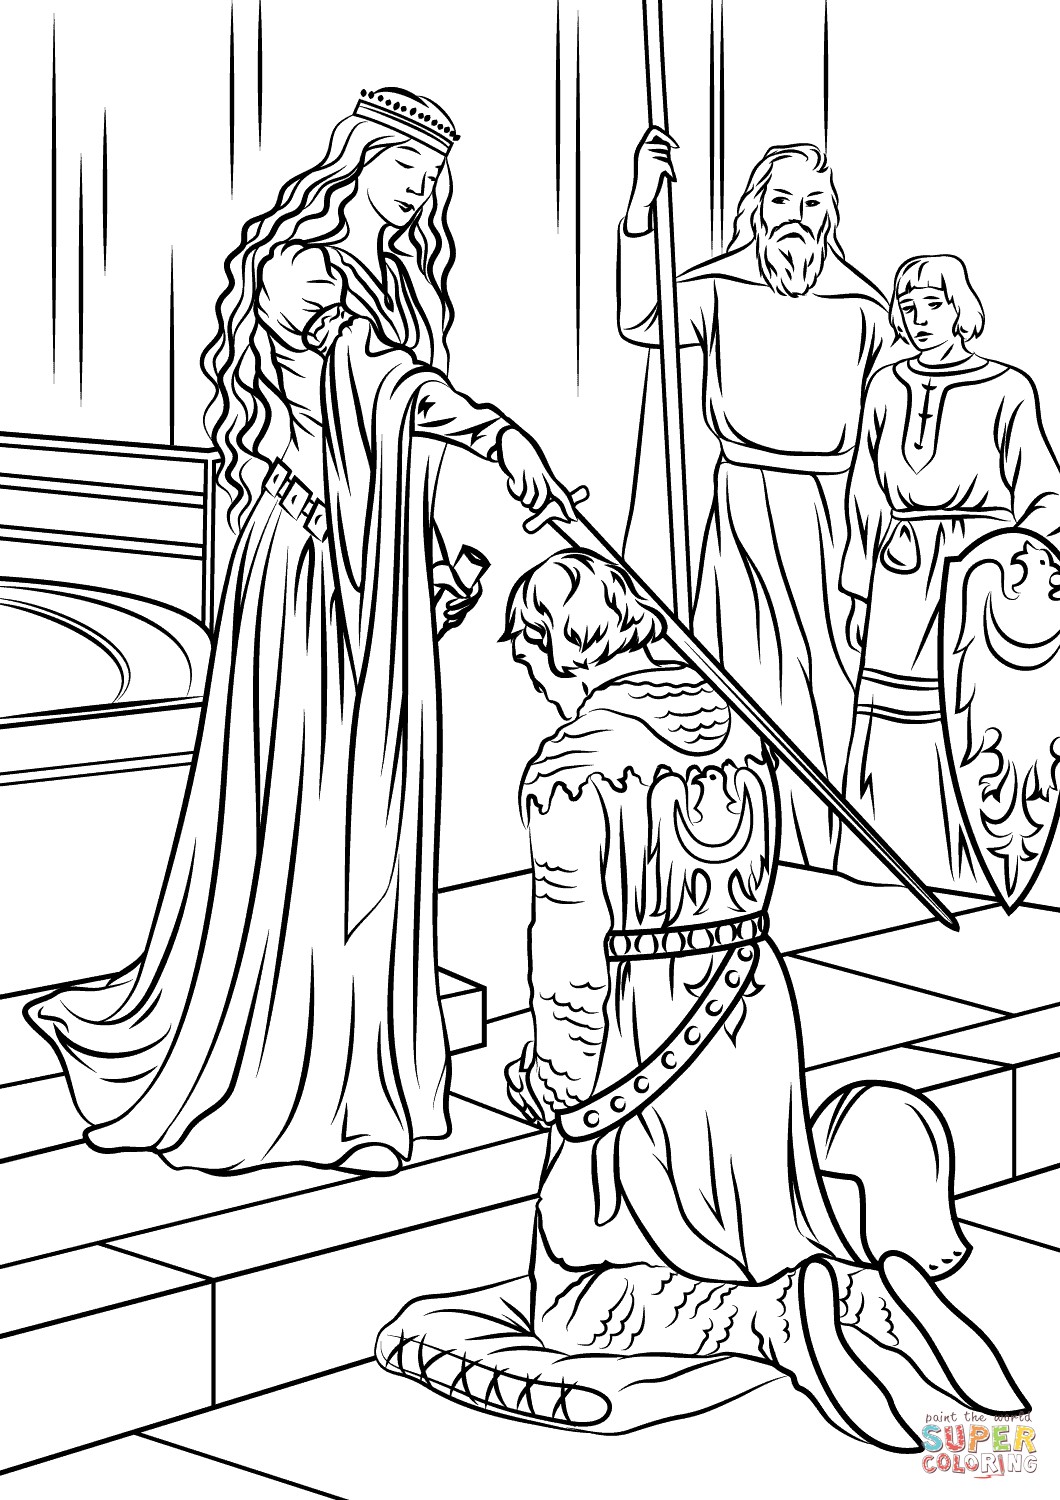 medieval-princess-coloring-pages-of-medieval-princess-coloring-pages Medieval Princess Coloring Pages Cartoon 